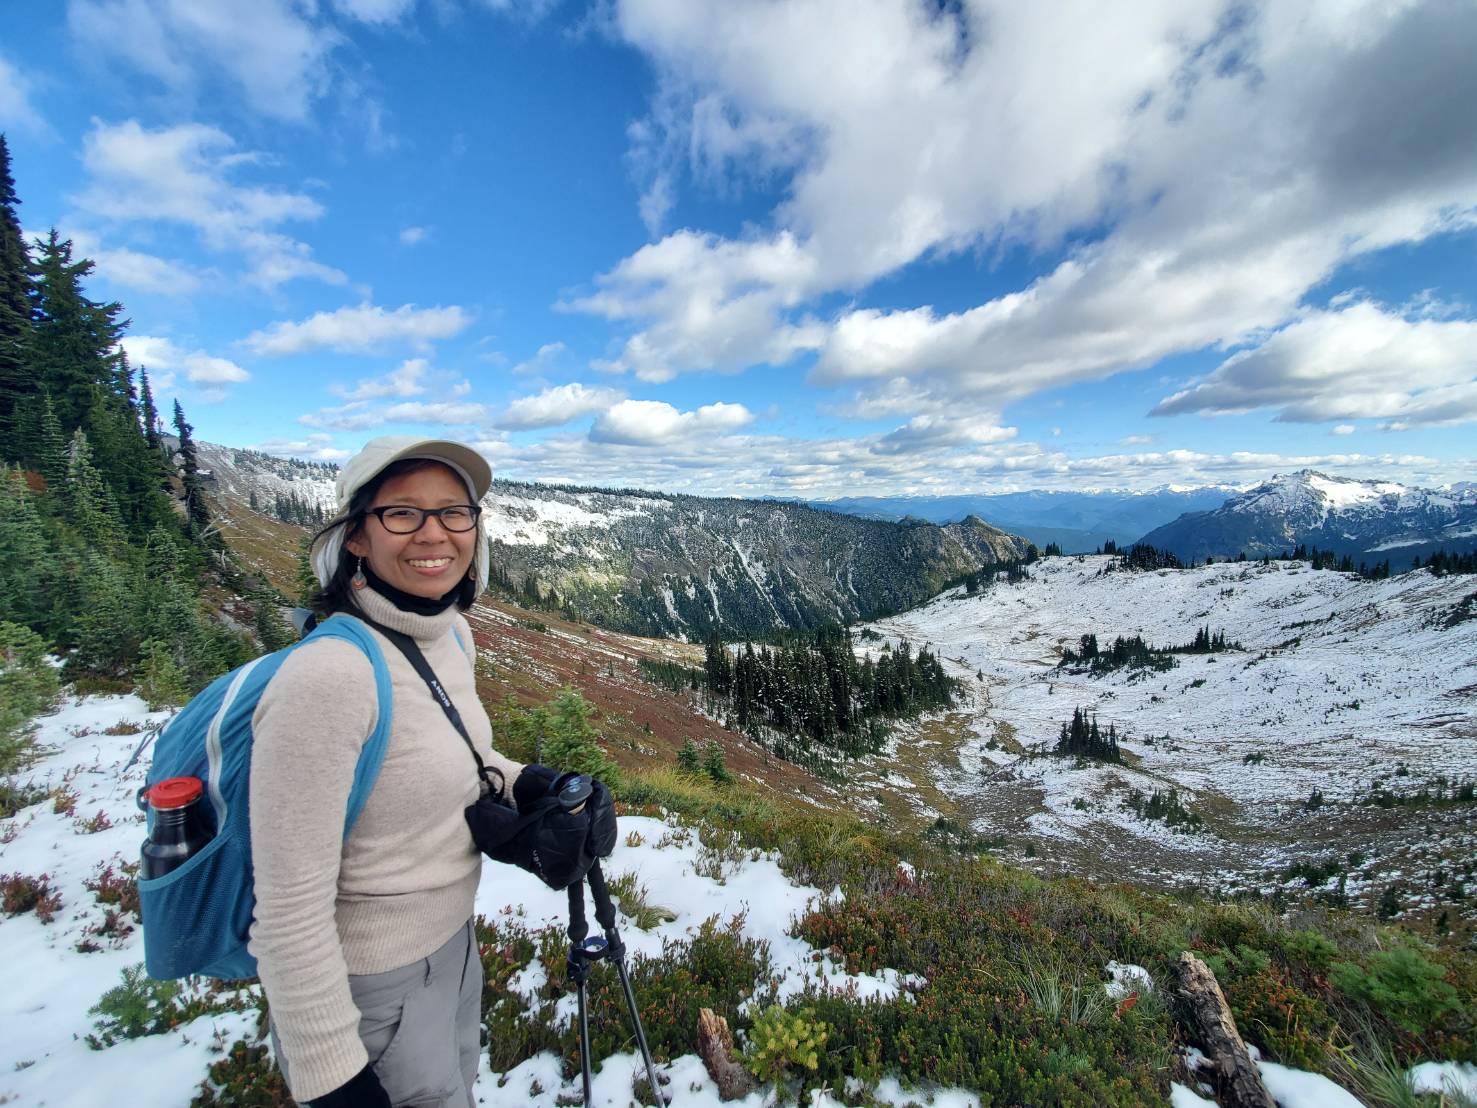 Danielle Chou hikes Mount Rainier National Park, Washington, in 2019. Chou will be embark on another adventure as she begins her AAAS Fellowship with the Department of Energy this fall.  Credit: Danielle Chou